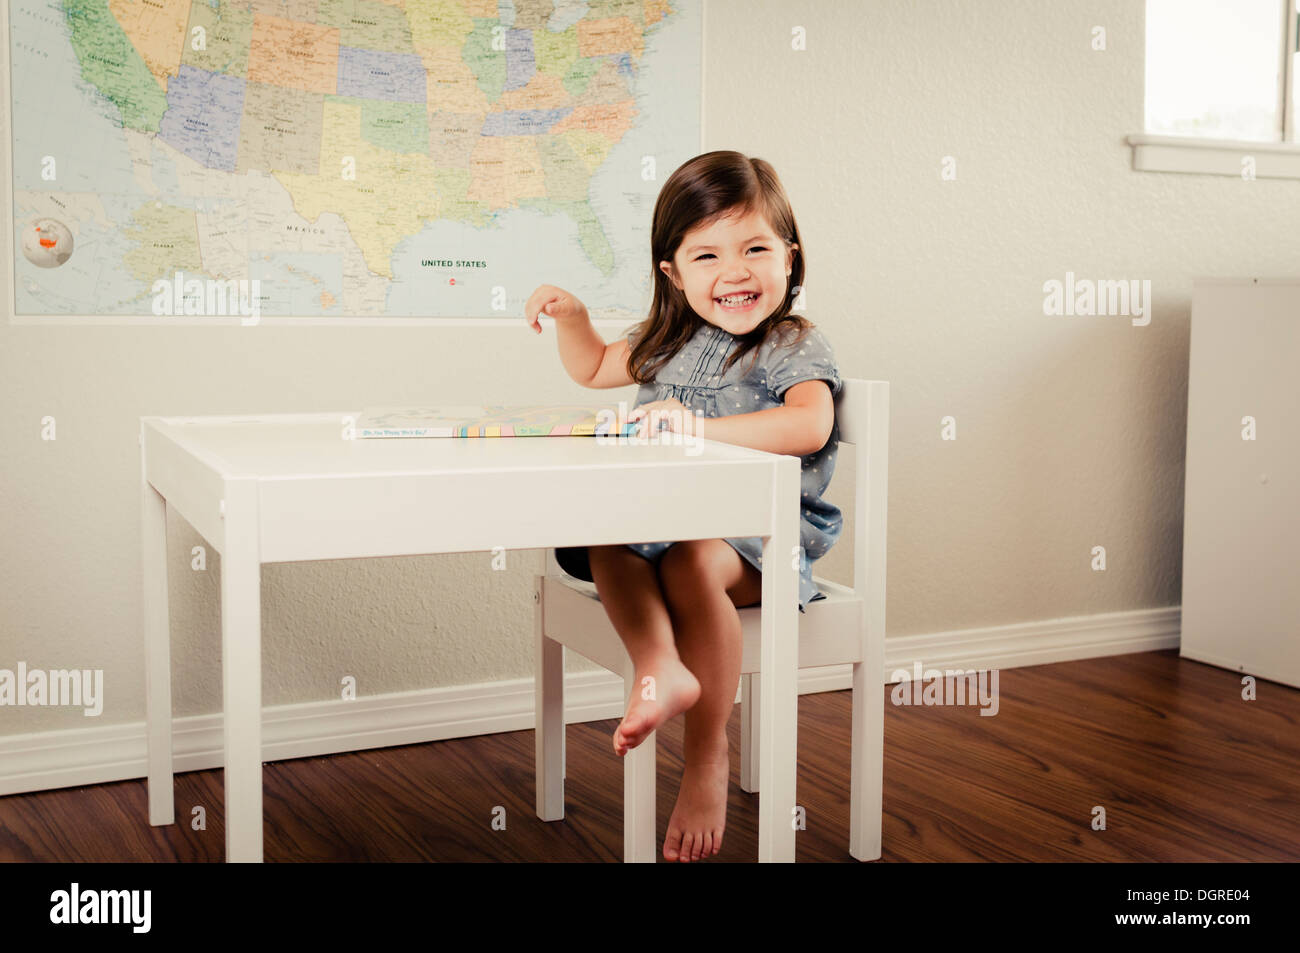 Toddler in classroom. Stock Photo